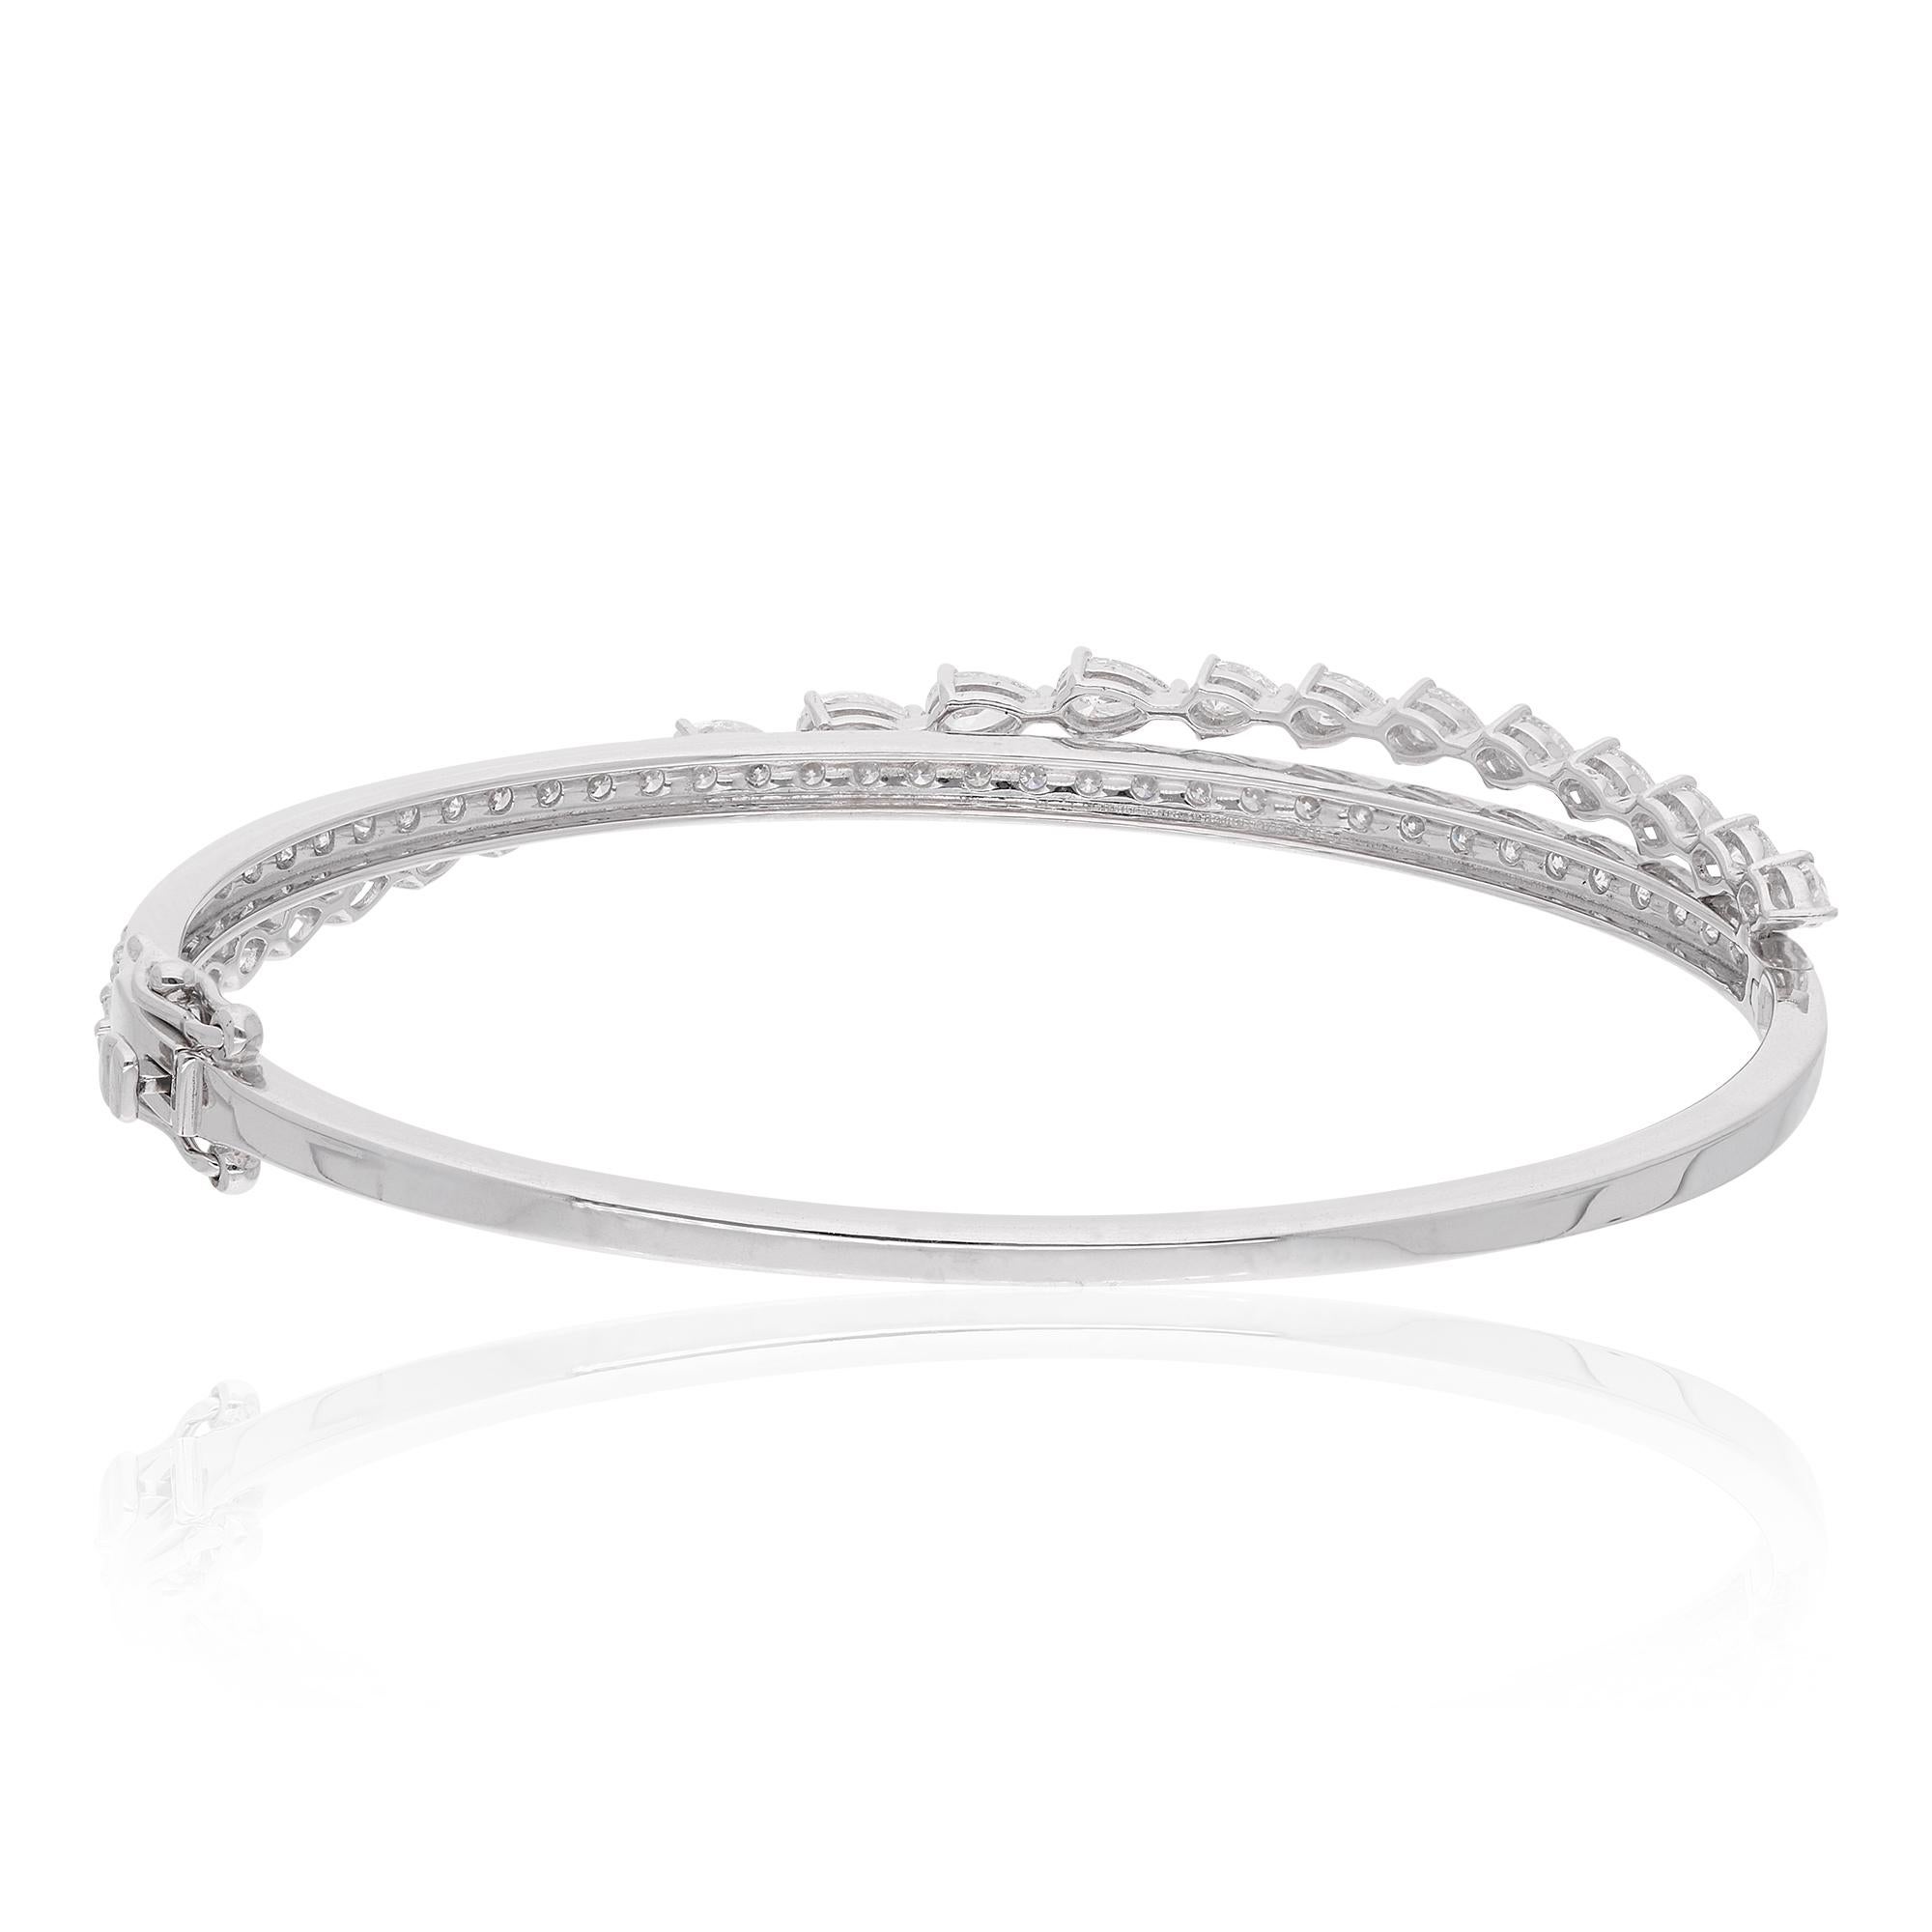 18k Diamond White Gold Bracelet / Round & Pear Cut Diamond Bangle / Pave Diamond Wedding Bracelet / Bangle Bracelet / Valentine's Day Gift

This dainty diamond bracelet is a promise of perfection and purity. Gift this little piece of happiness to